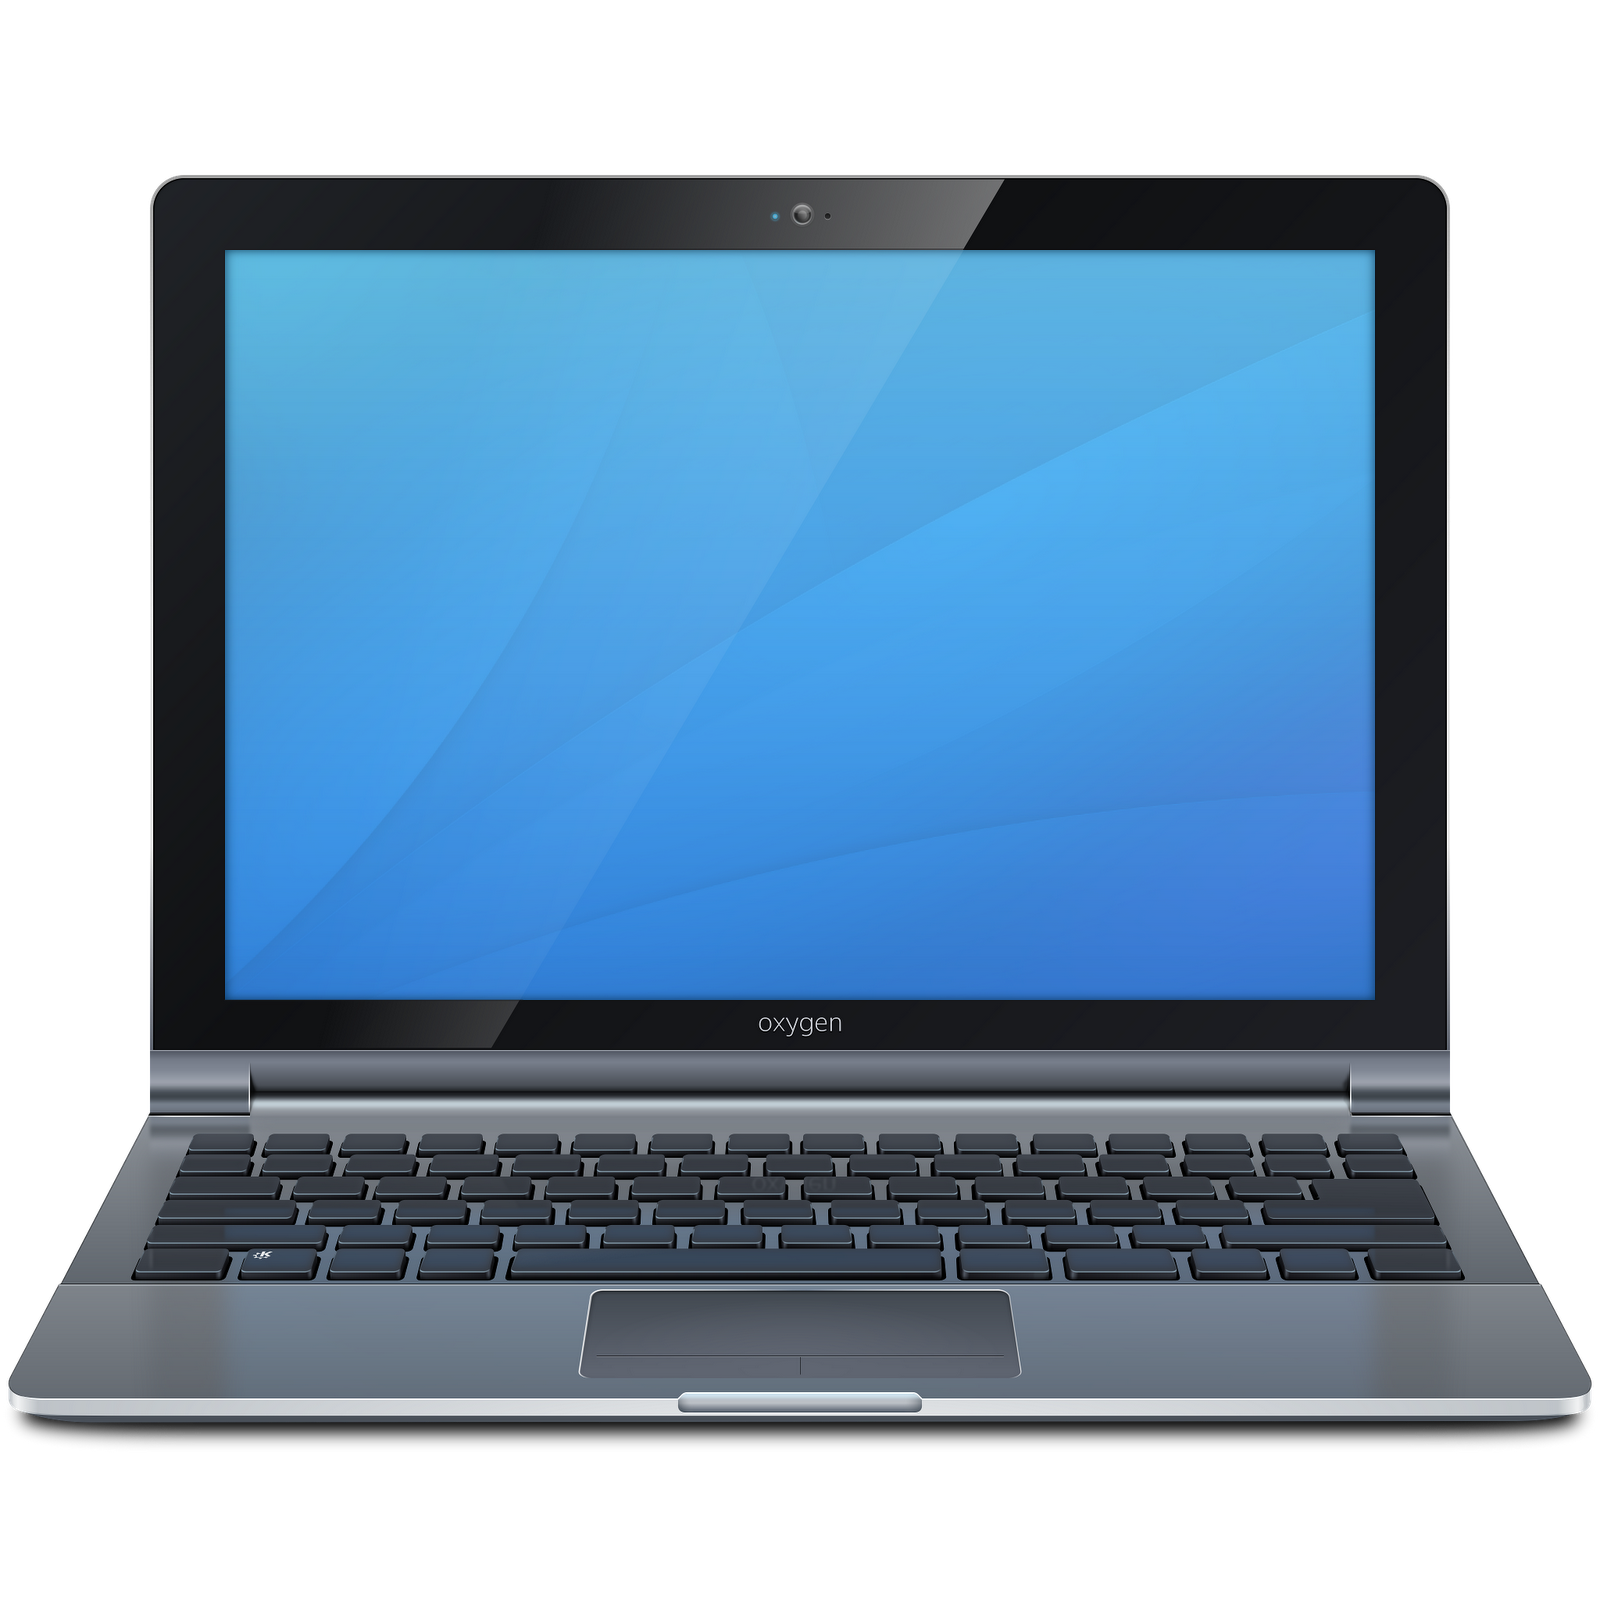 clipart of laptops - photo #33